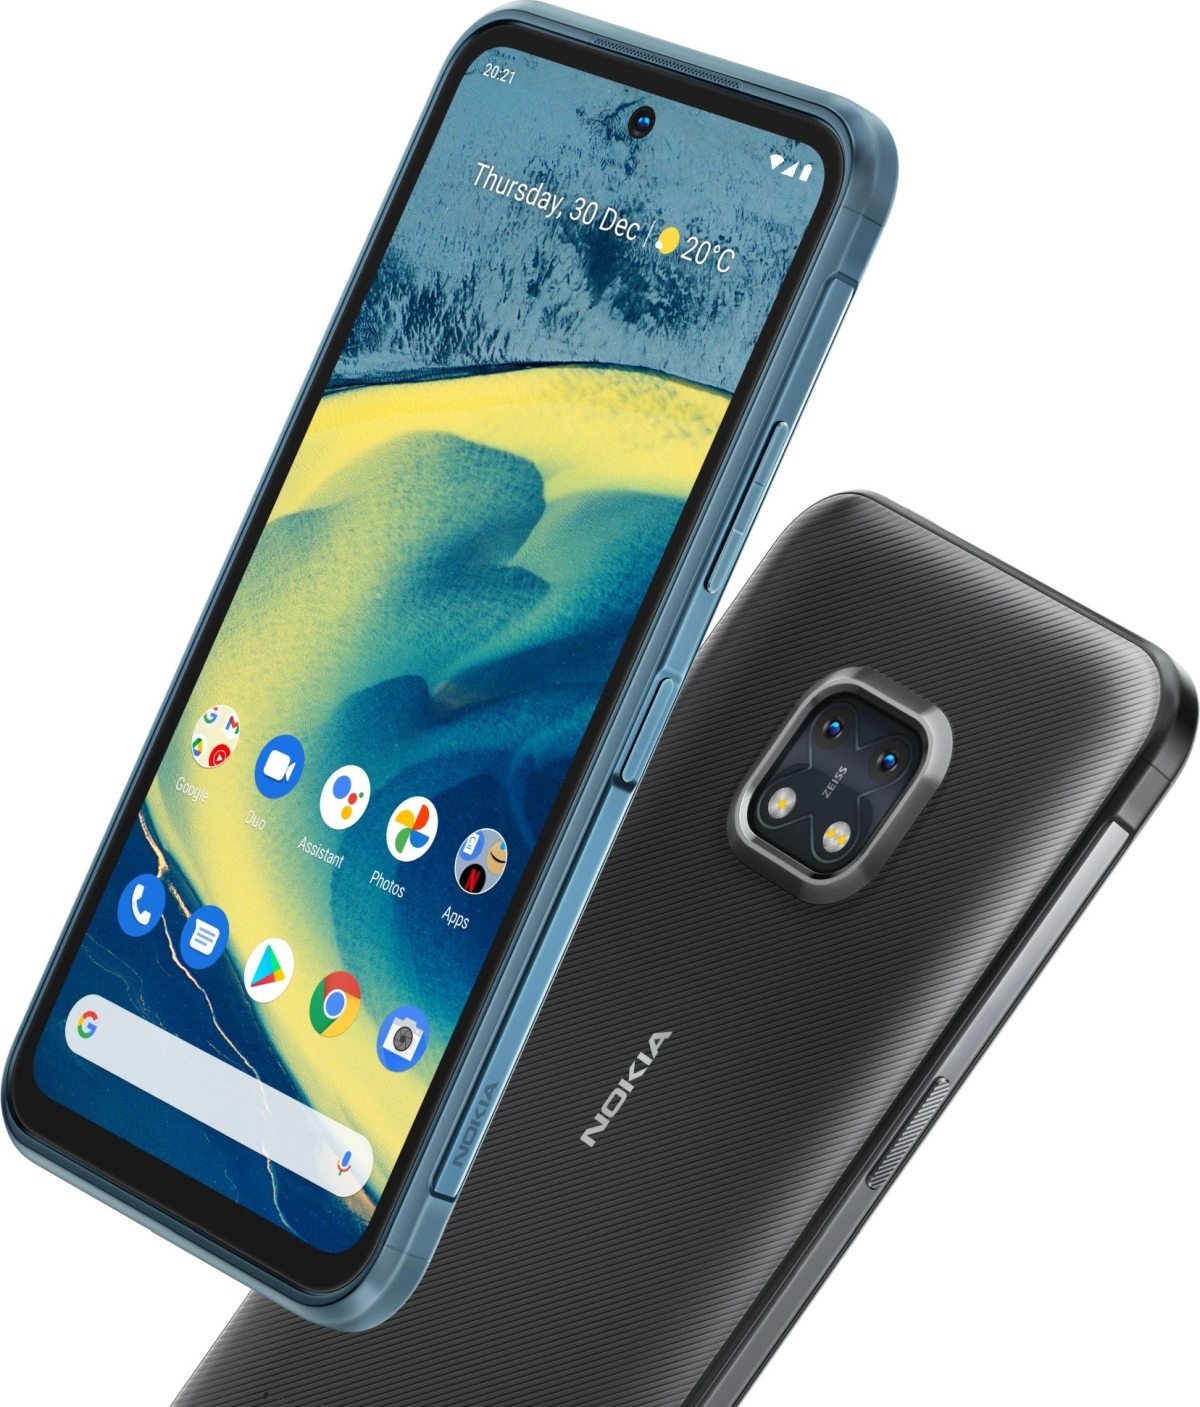 The Nokia XR20 is a heavyduty 5G phone with 3 years